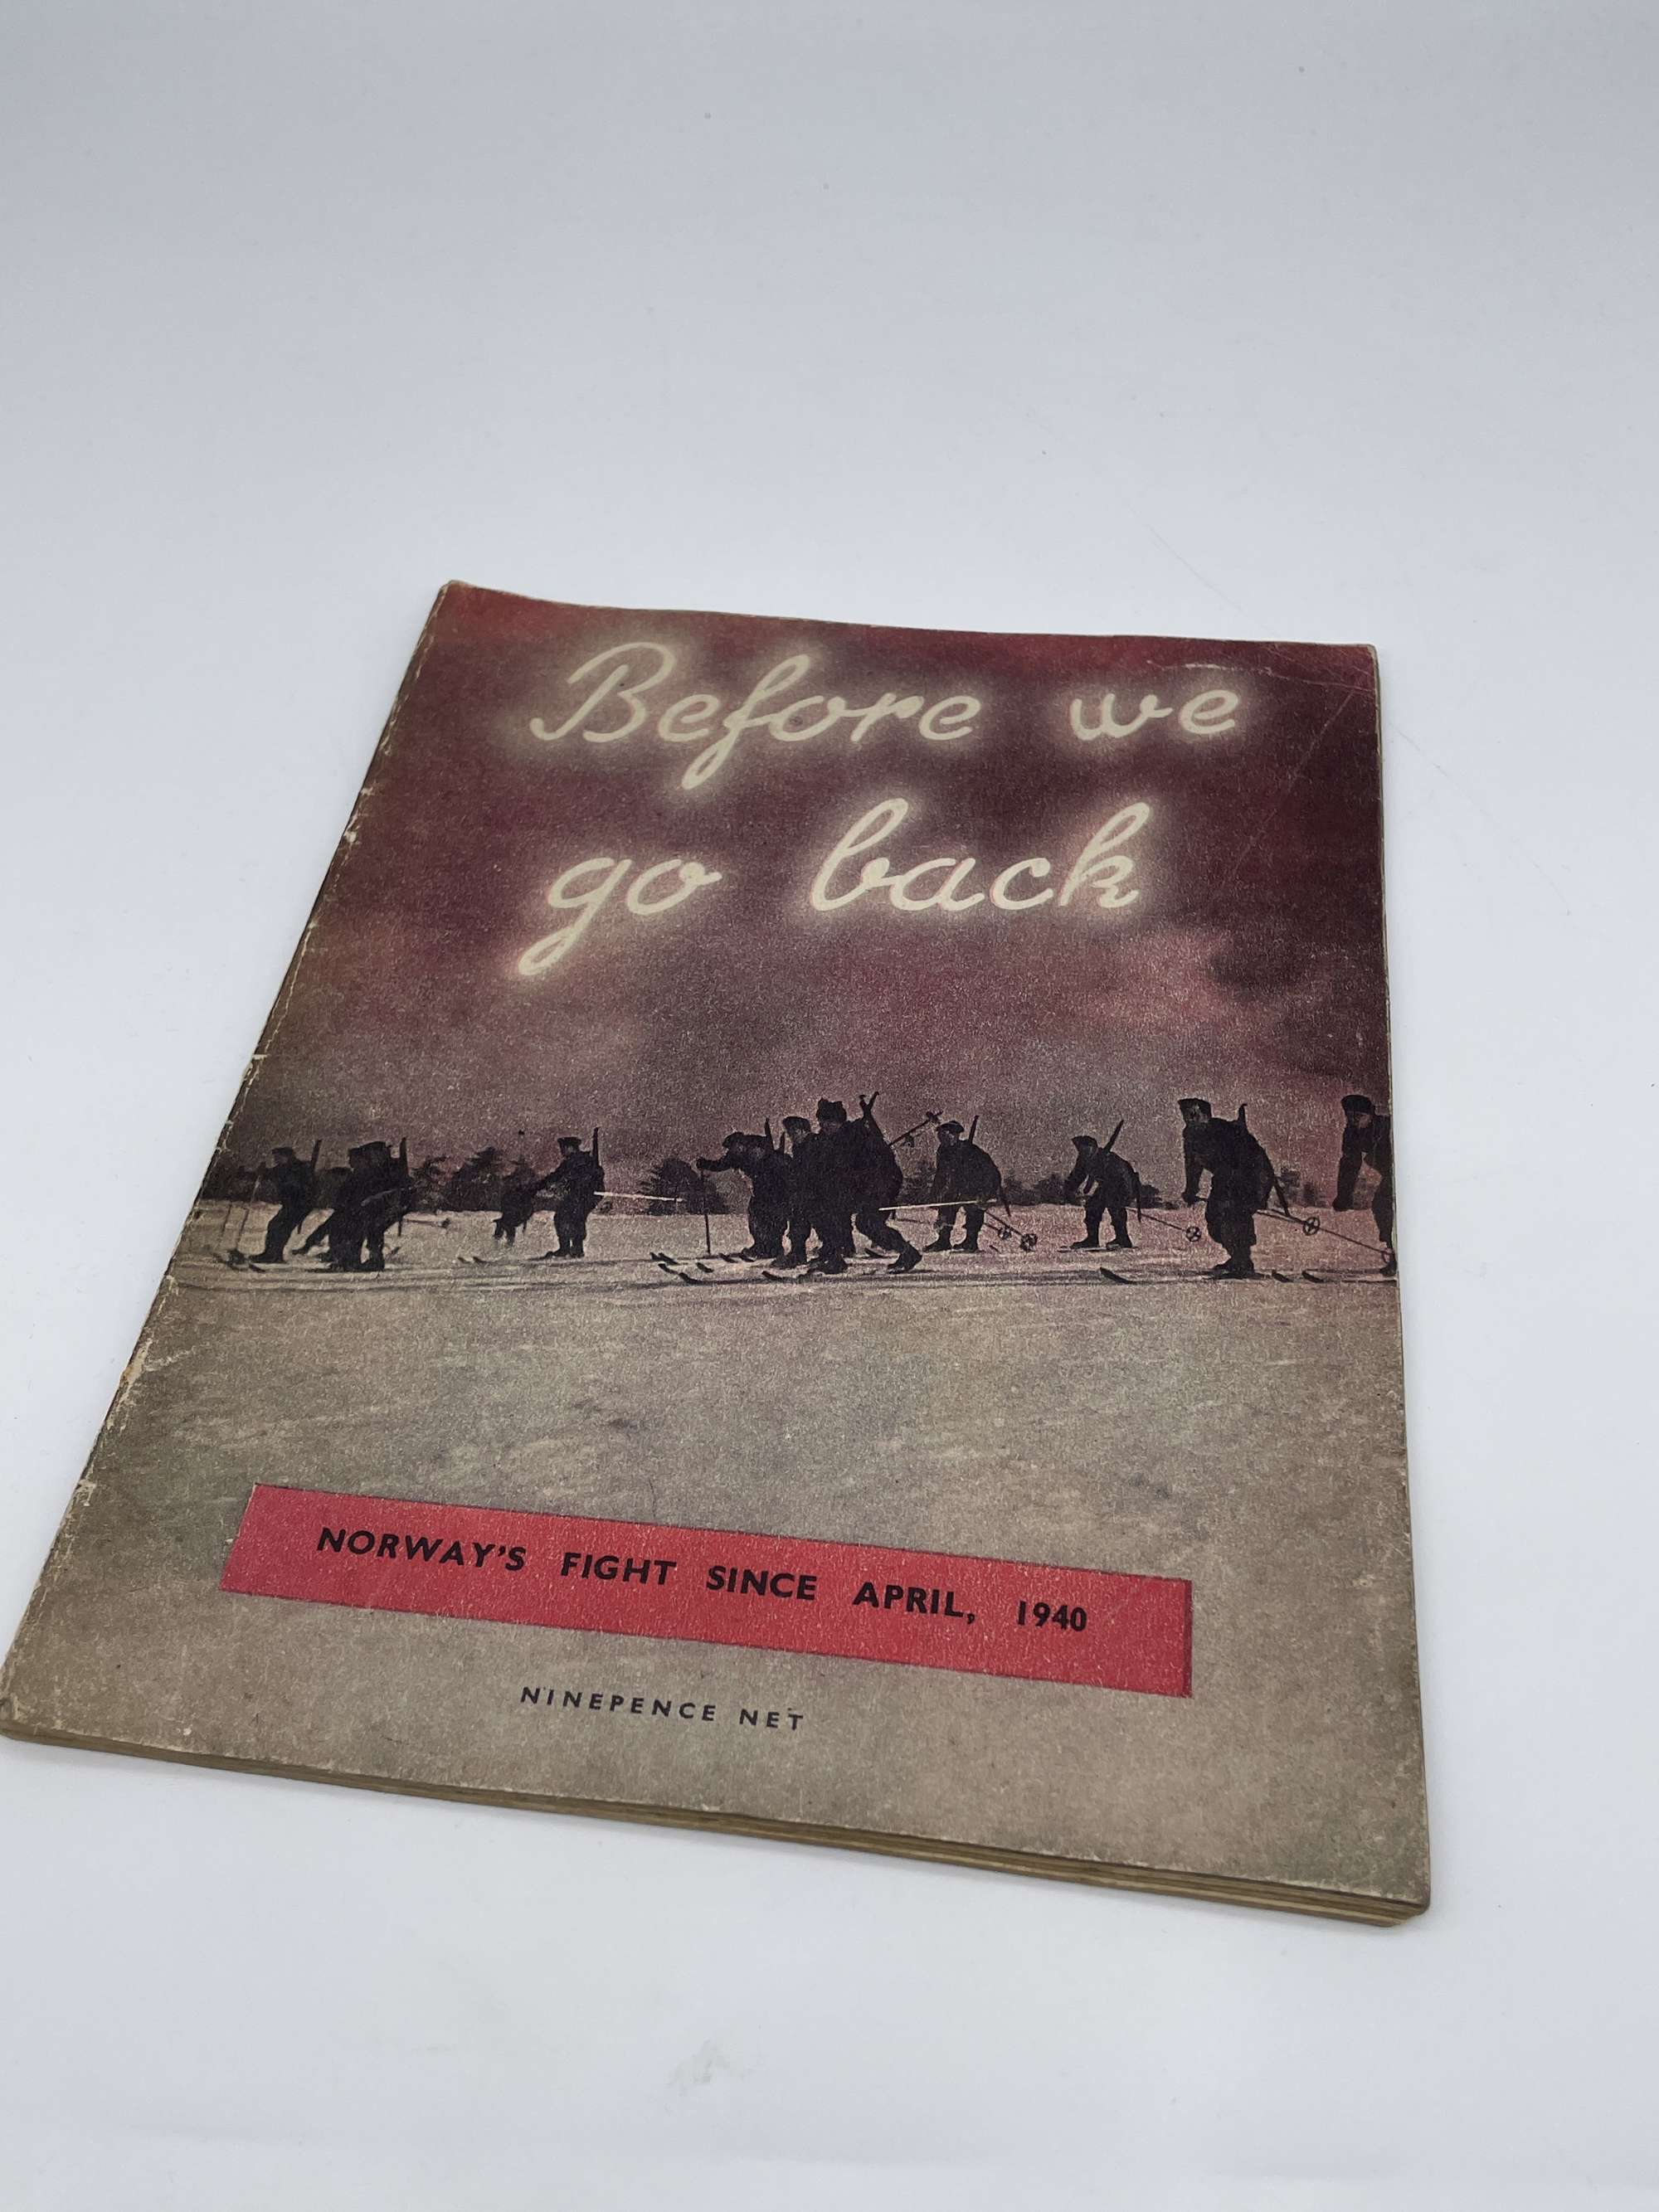 Original 1944 Dated Book, Before We Go Back, Norway's Fight Since April 1940